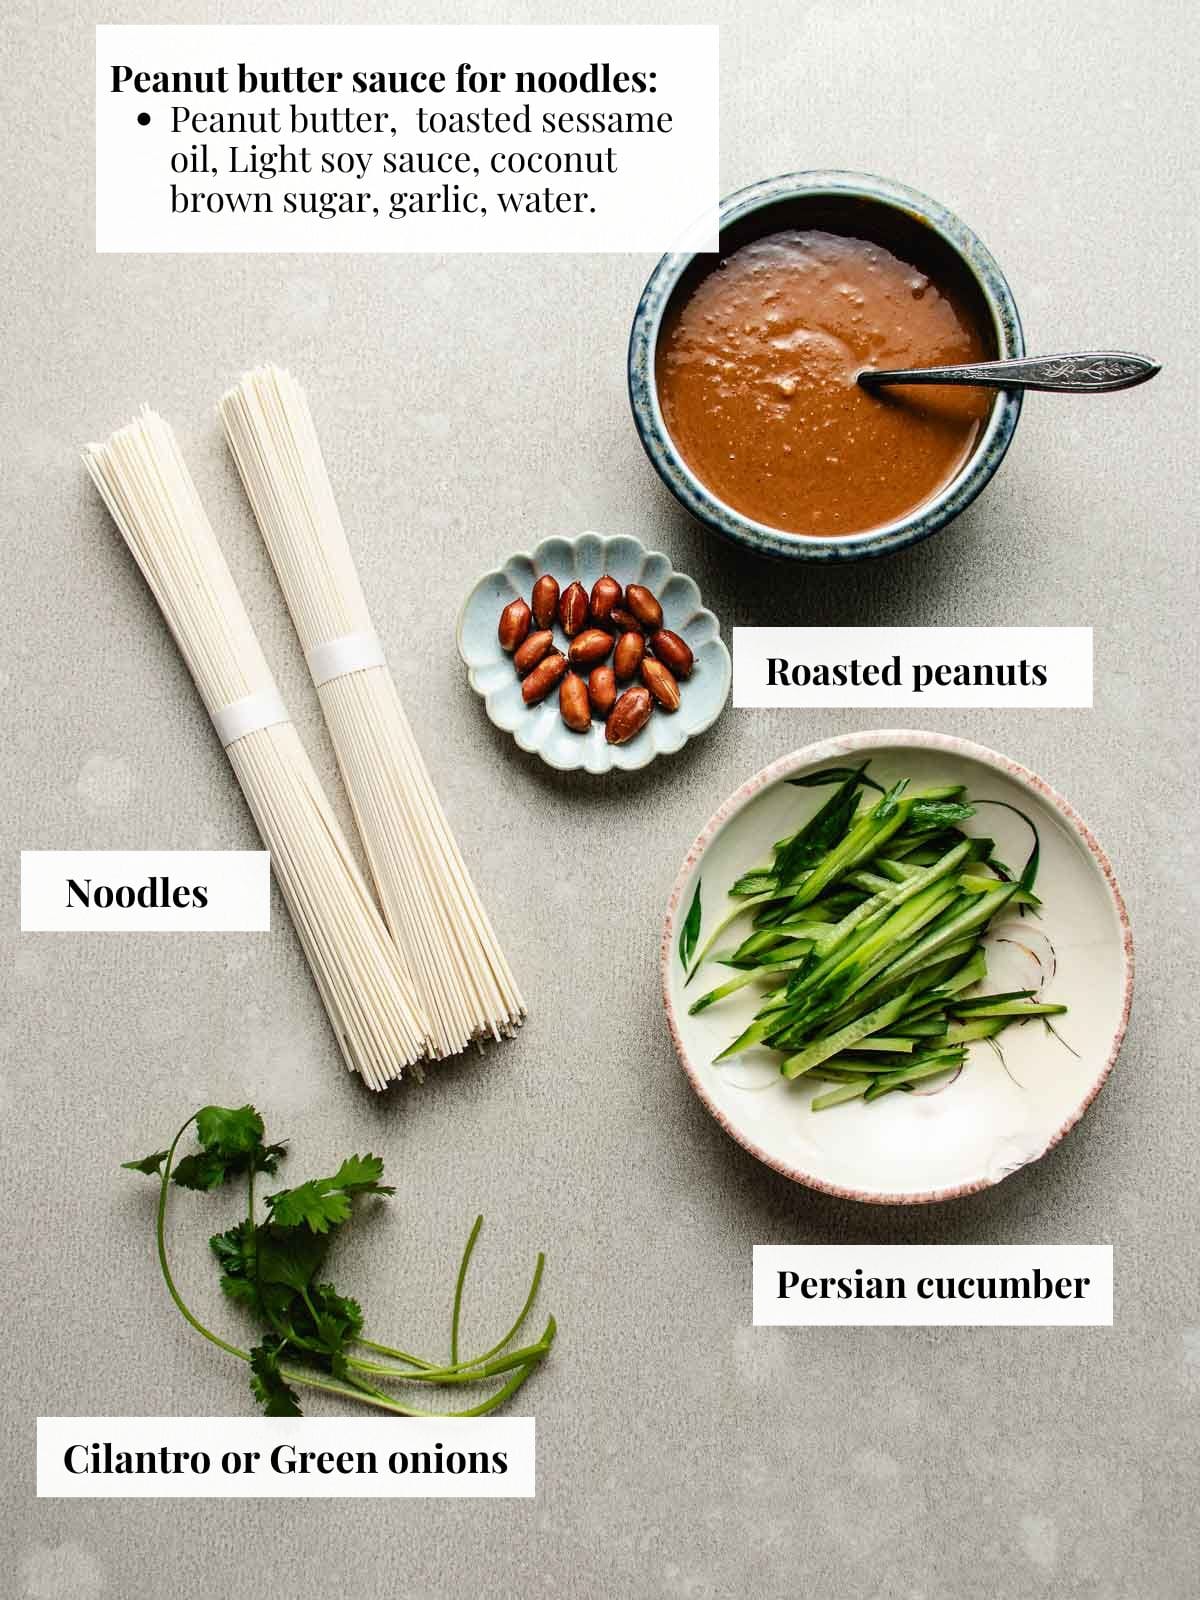 An ingredient image shows what are needed to make the dish.